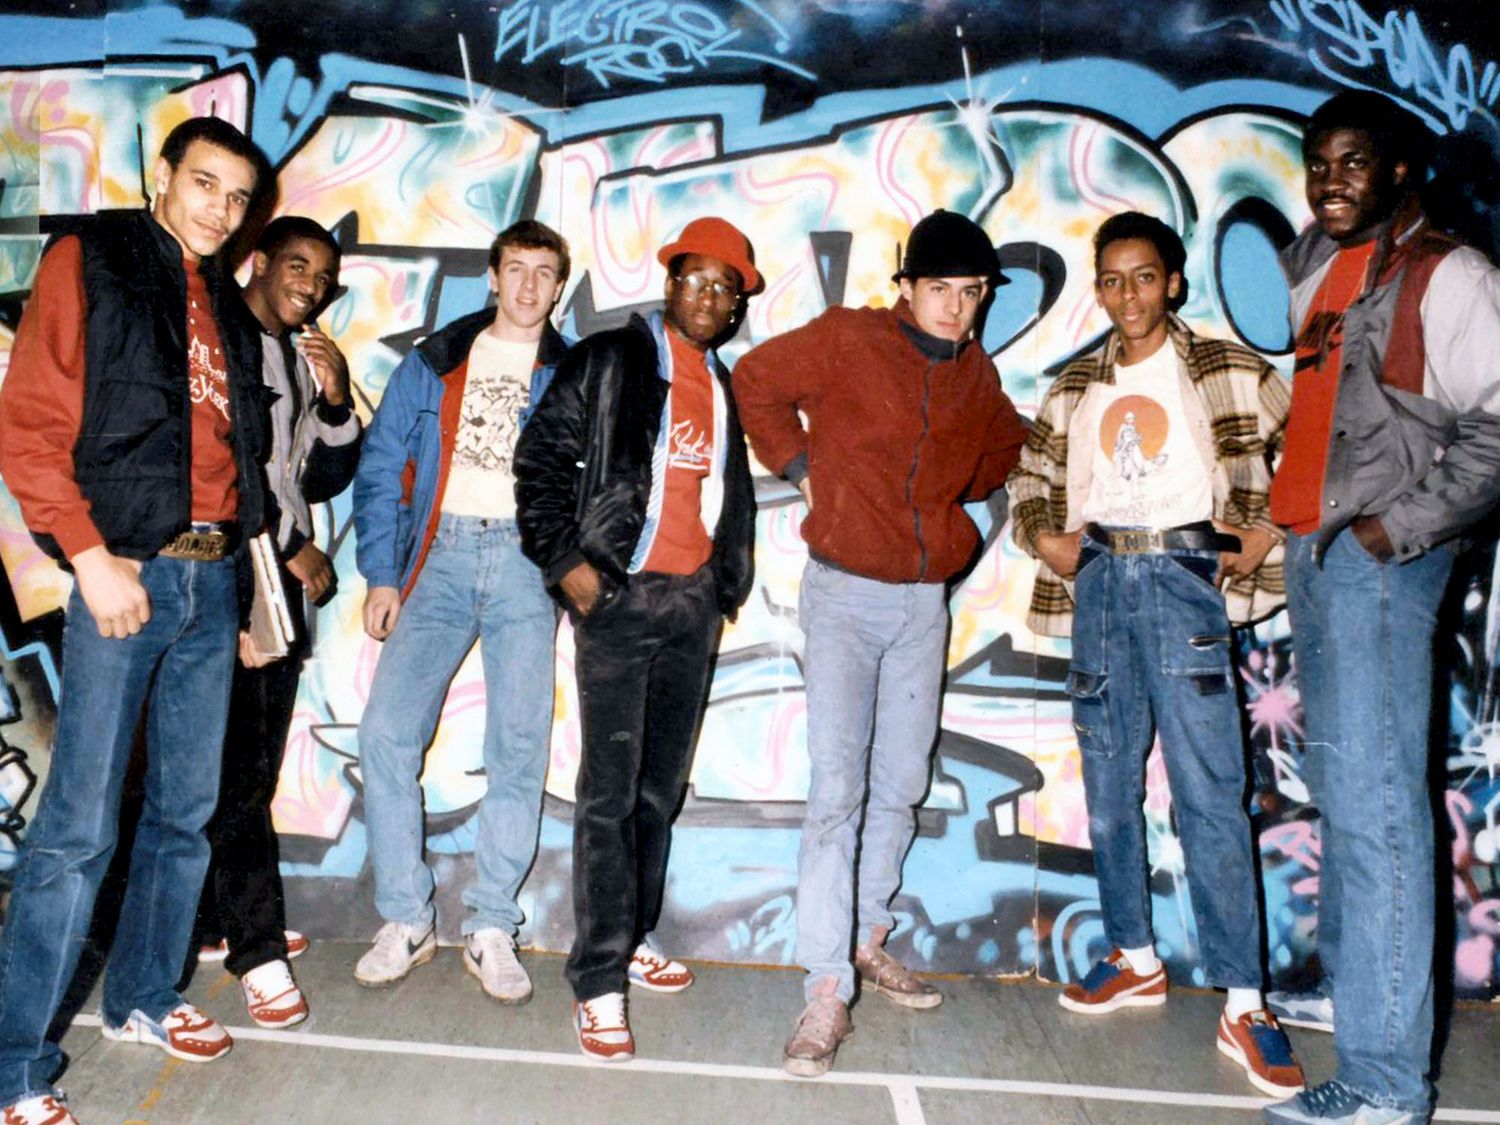 "The Chrome Angelz" crew will have a huge influence on the development of Graffiti in London and Paris. Its founding members here in spring 1985 with the Supreme Graffiti Team (©Martin Jones).